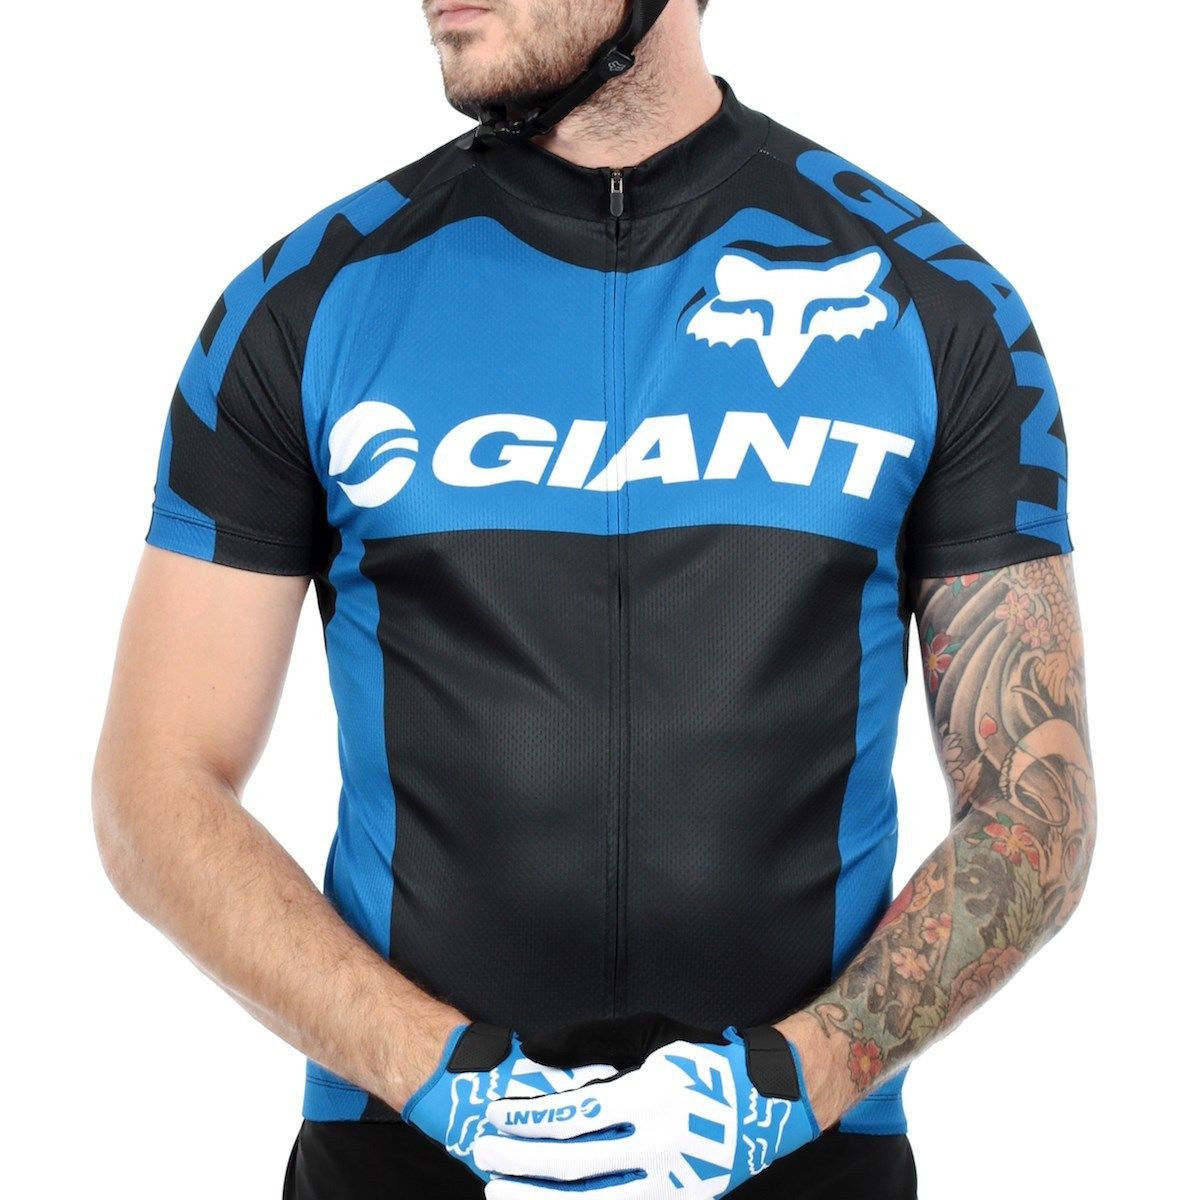 giant jersey